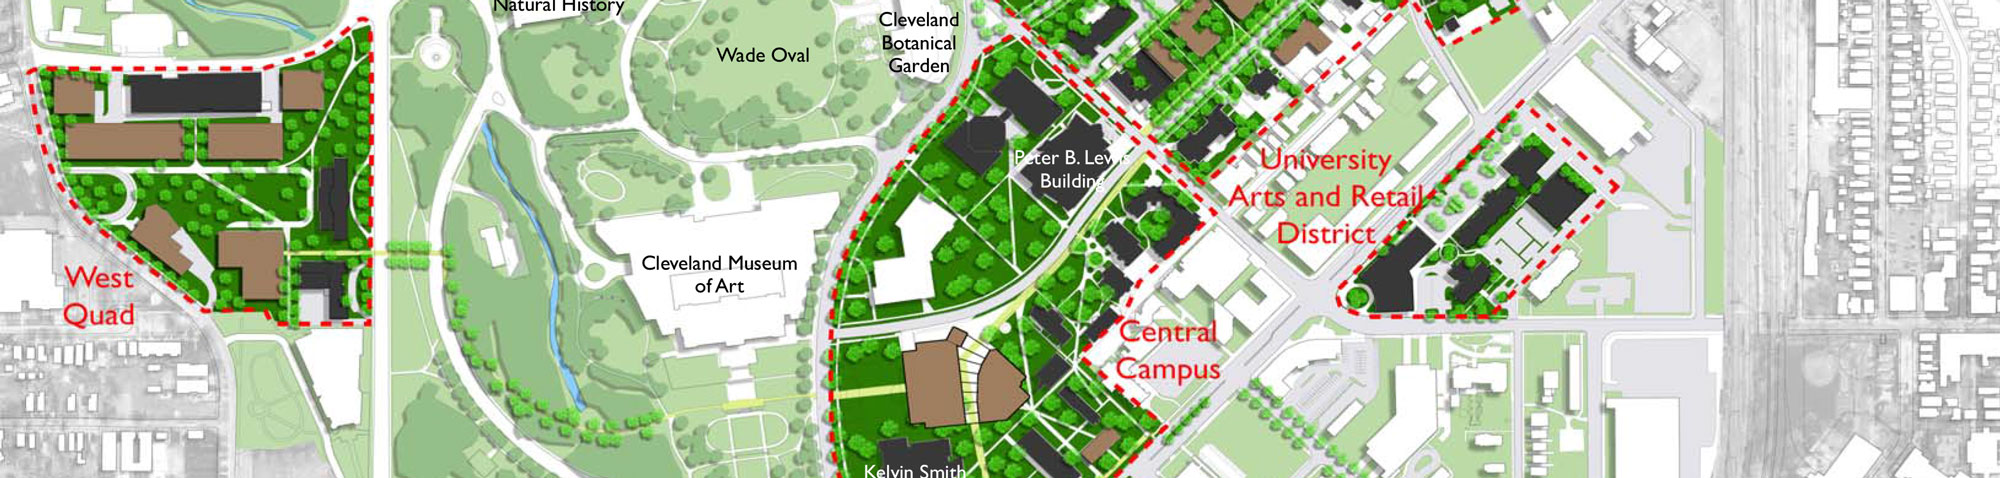 photo of past master plan blueprint showing university circles west quad and retail district in planning